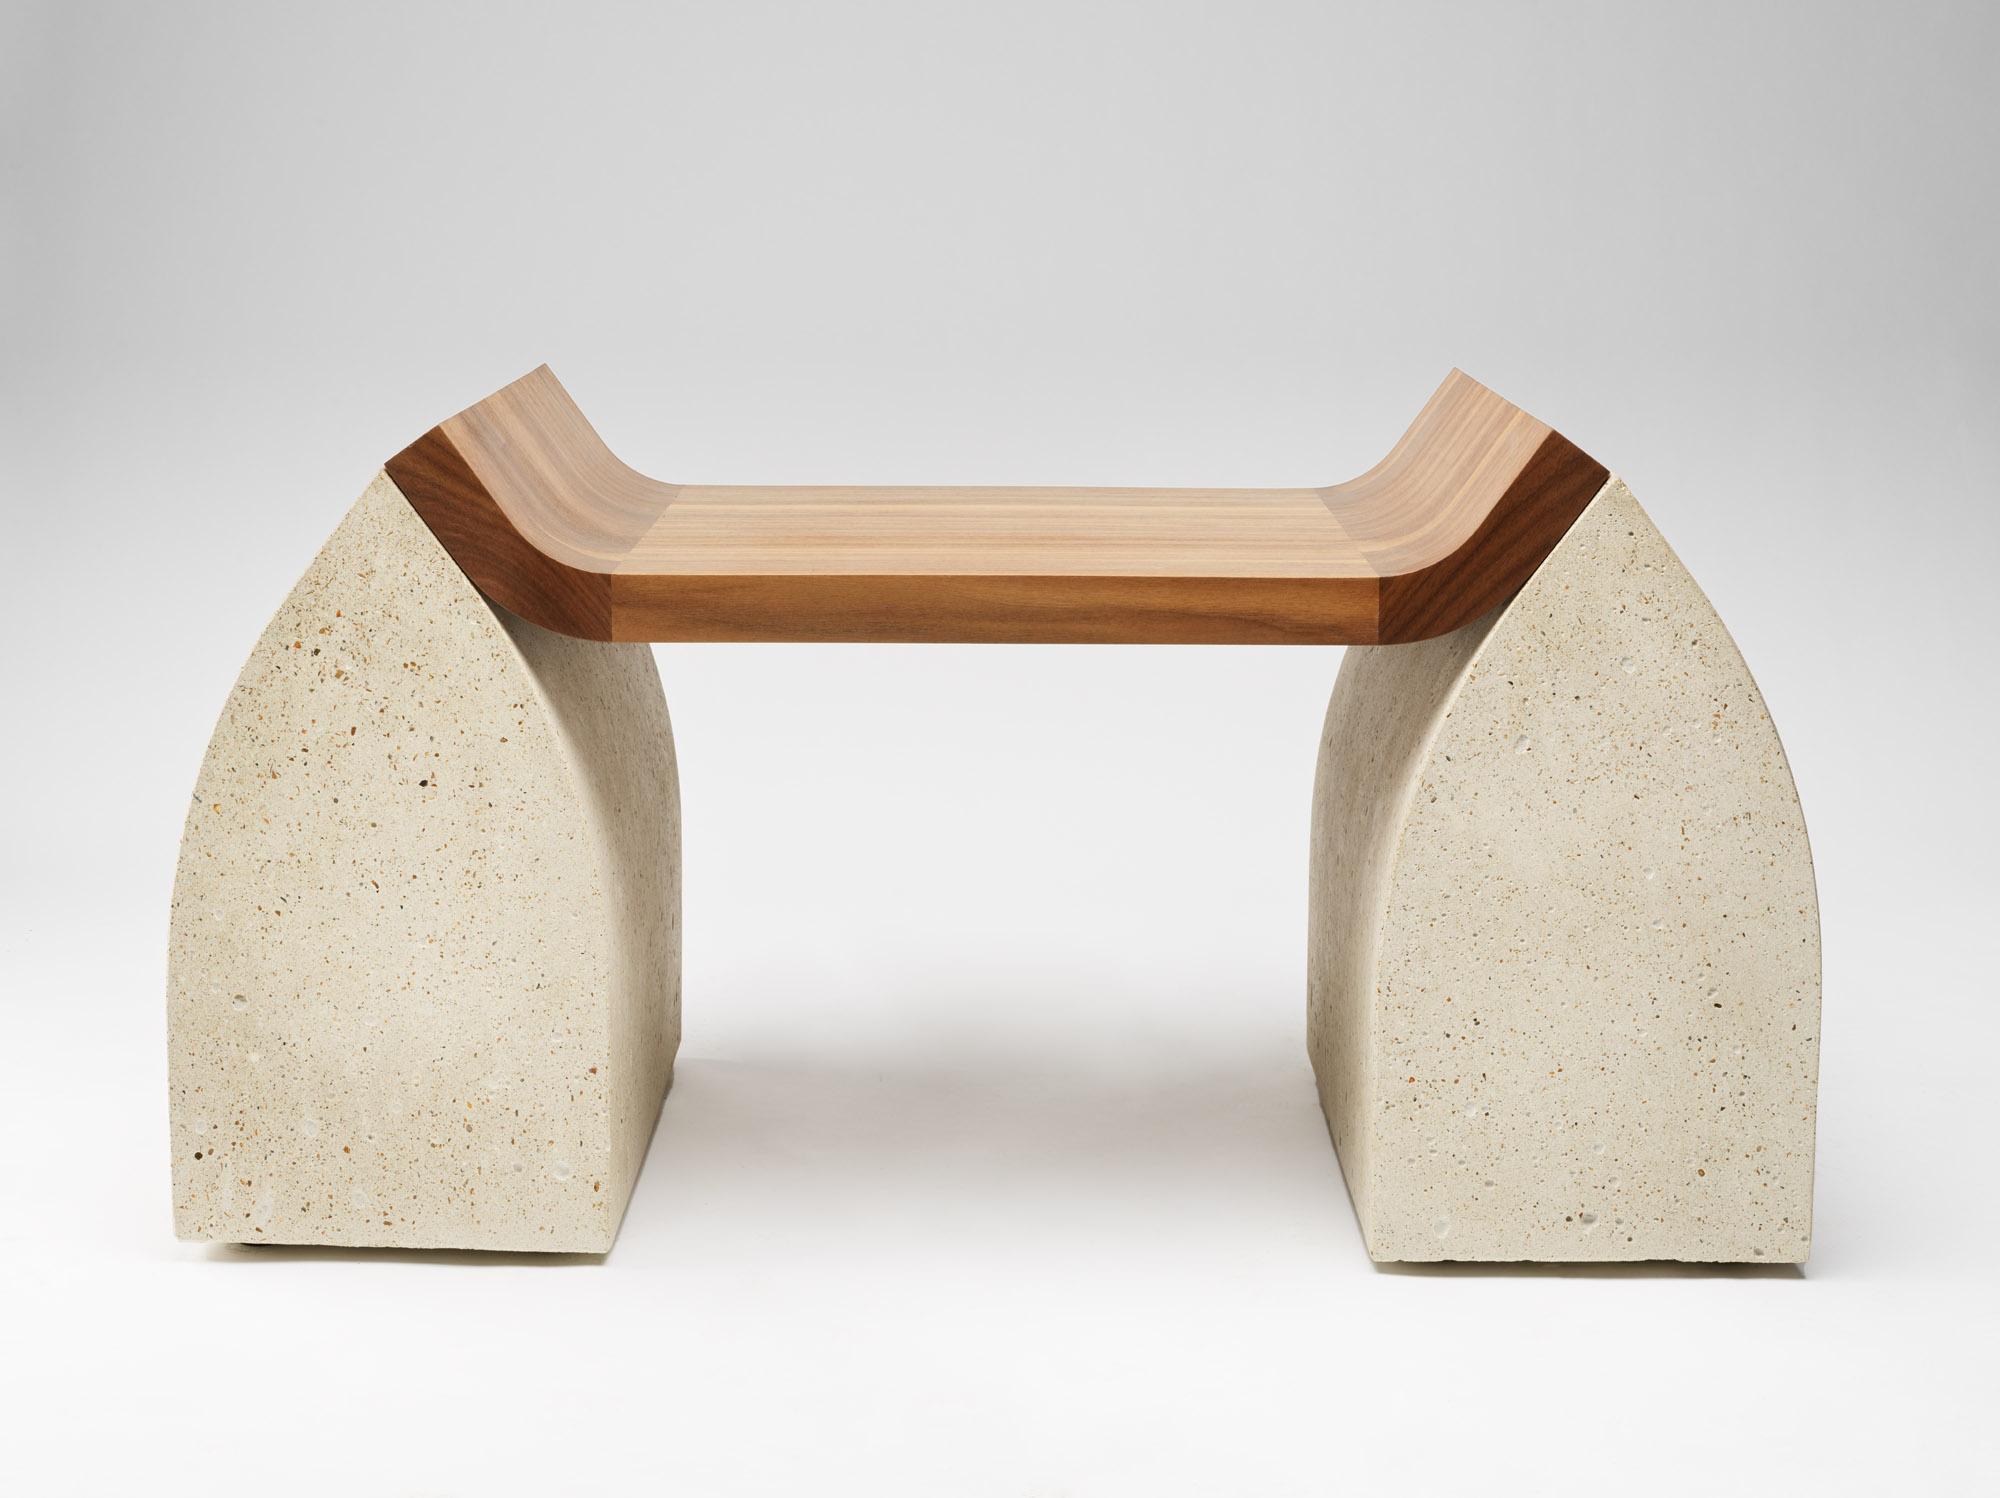 Small Traaf Bench by Tim Vranken
Materials: colored oak (oiled), granite
Dimensions: 105 x 60 x H 46 cm 
Variations available.  

Tim Vranken is a Belgian furniture designer who focuses on solid, handmade furniture. Throughout his designs the use of